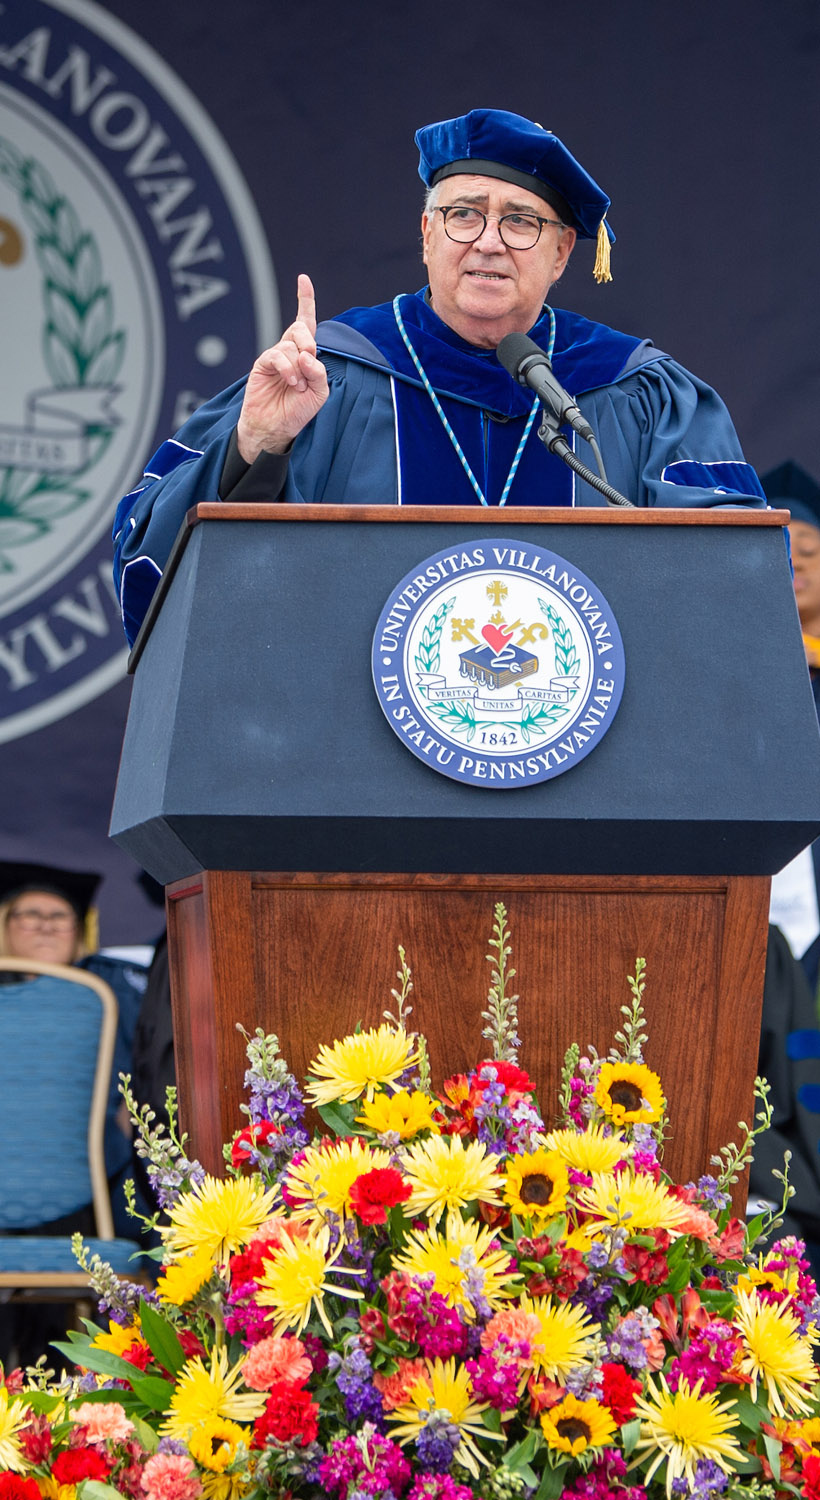 Father Peter Donahue speaking at Commencement